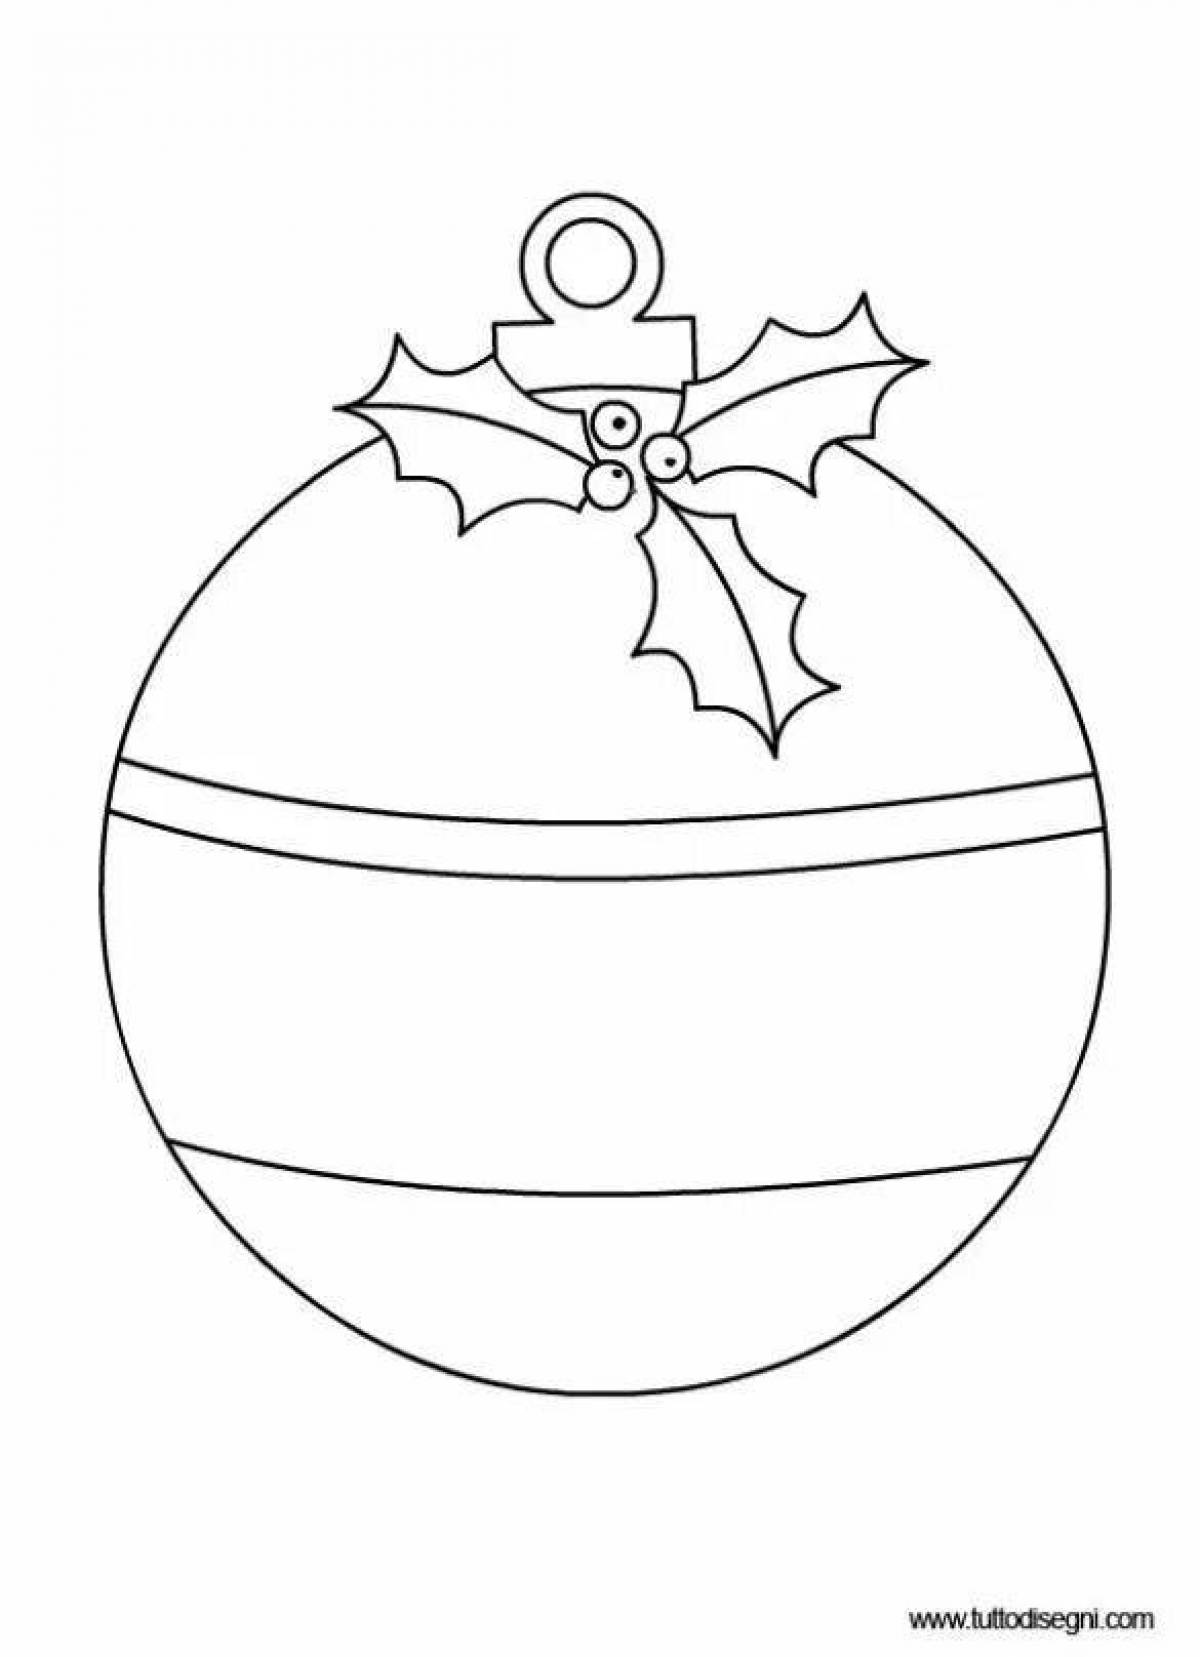 Exquisite coloring christmas ball